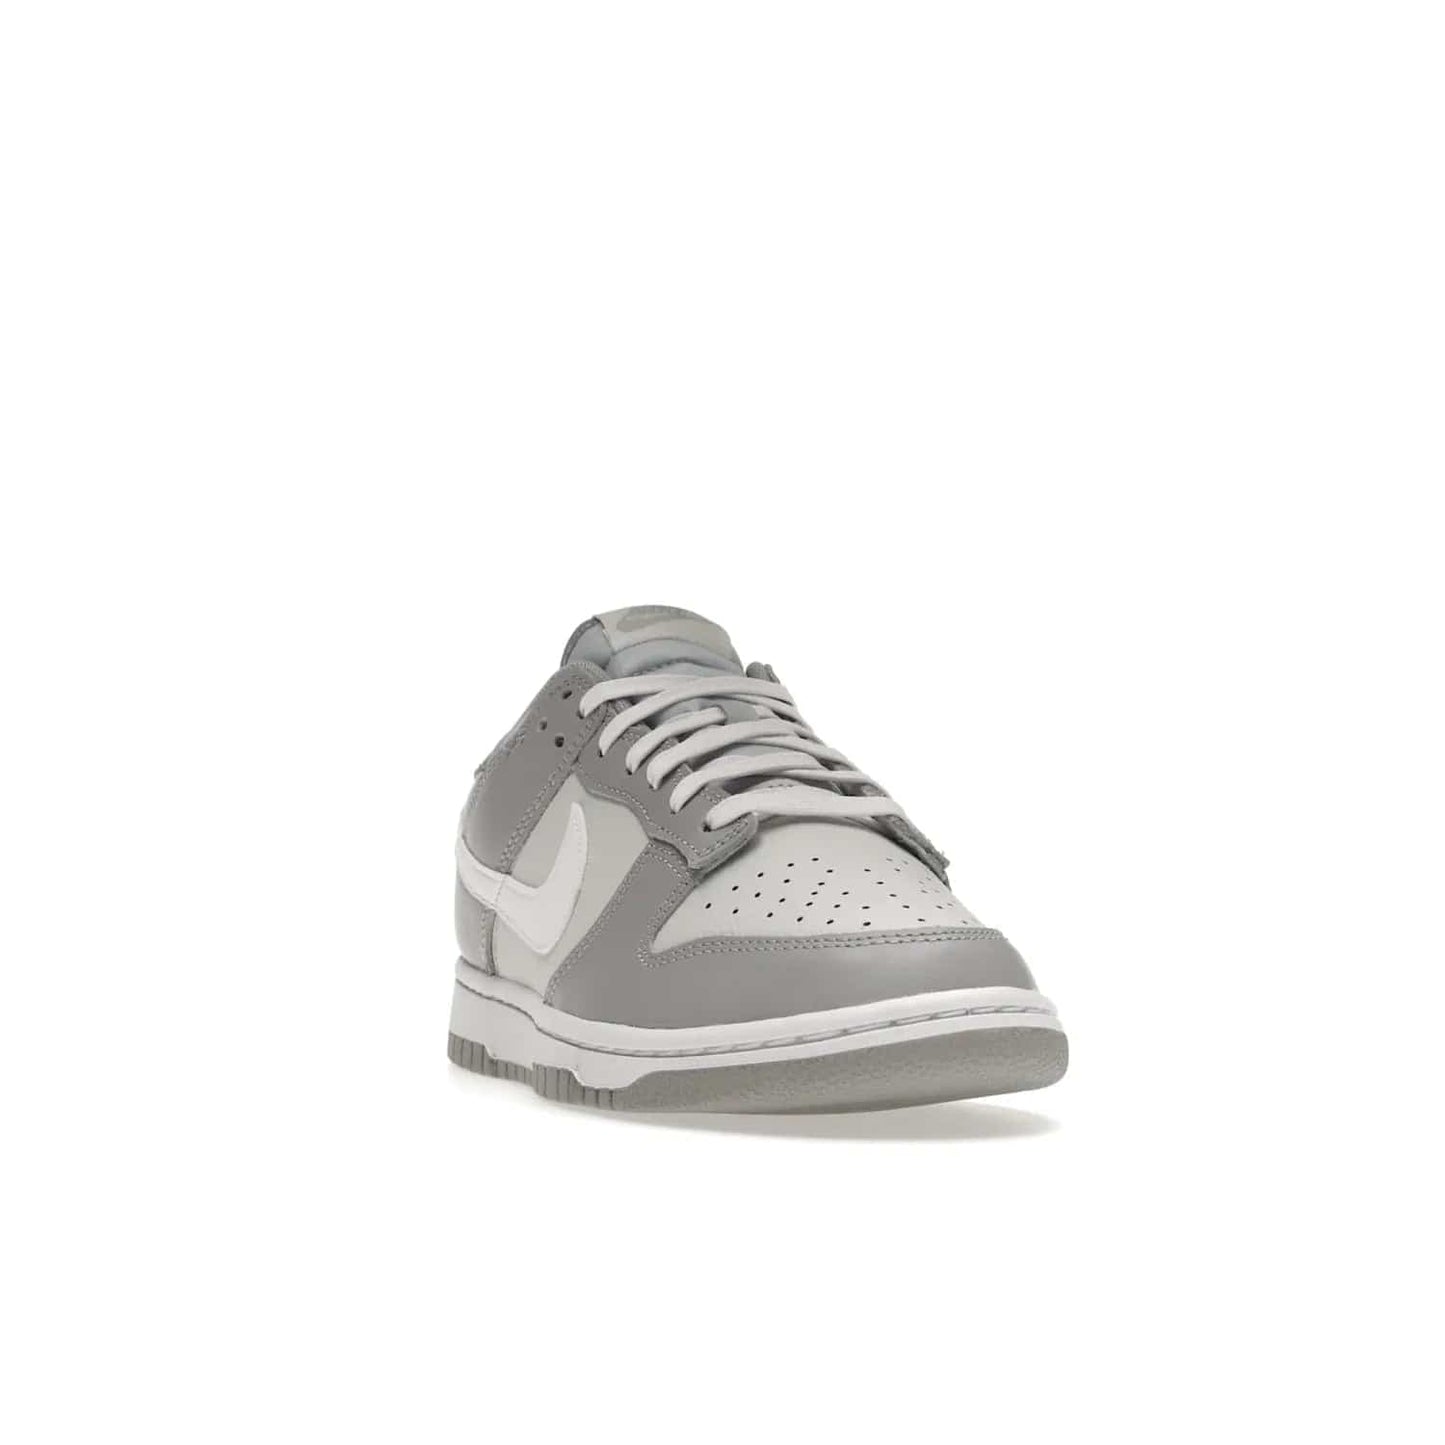 Nike Dunk Low Two Tone Grey - Image 8 - Only at www.BallersClubKickz.com - Fresh Nike Dunk Low Two Tone Grey leather/overlay Sneaker. White Swoosh detailing, nylon tongue, woven label and Air Sole. Get yours and stay on the trend.